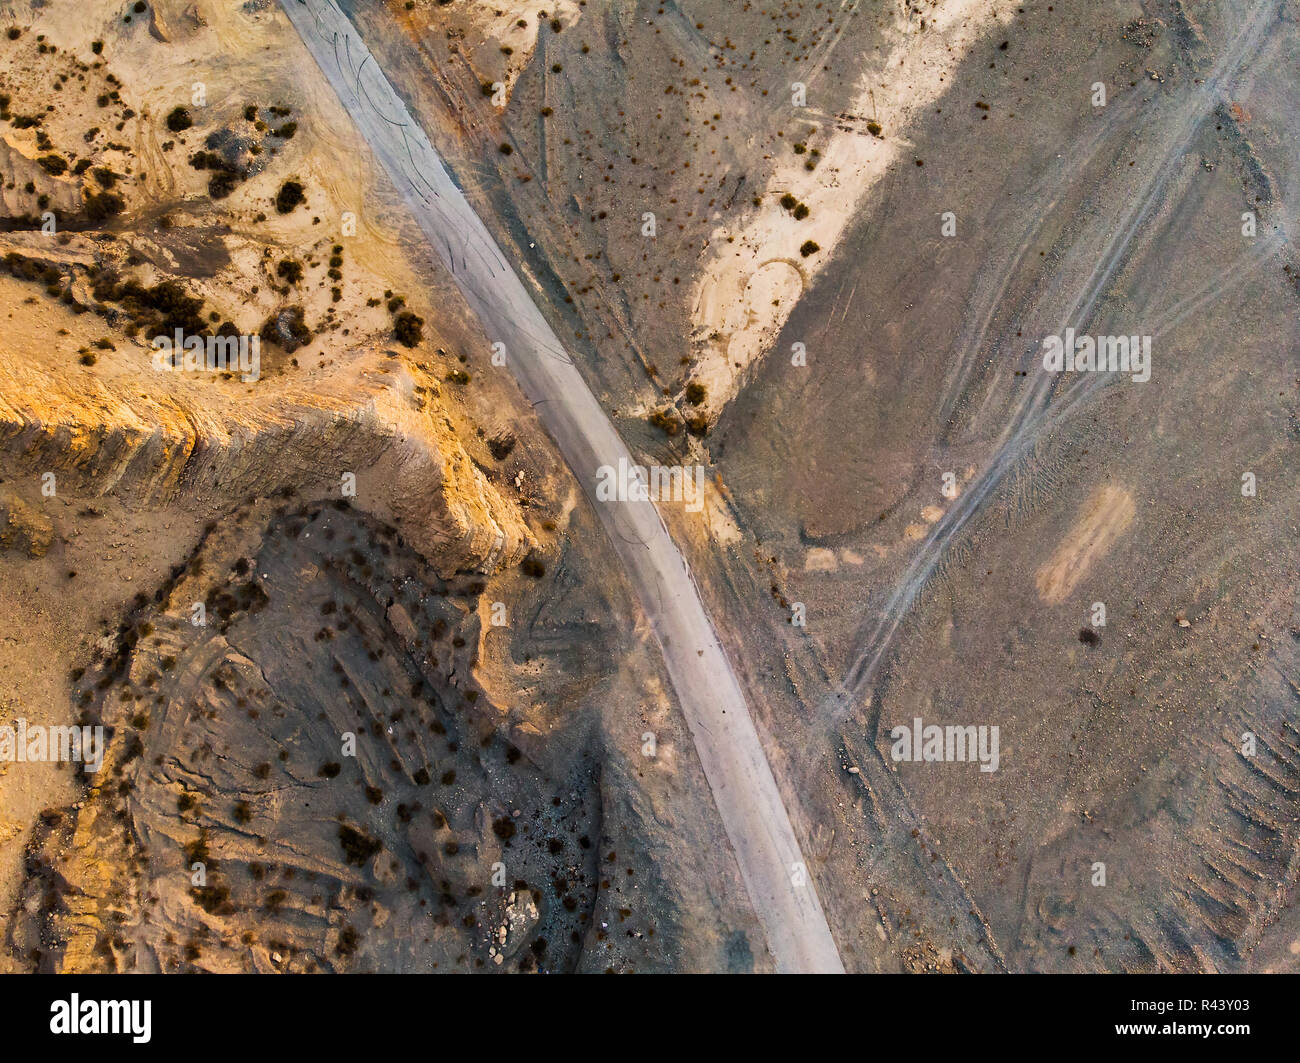 Aerial view of a desert road with rocky scenery Stock Photo